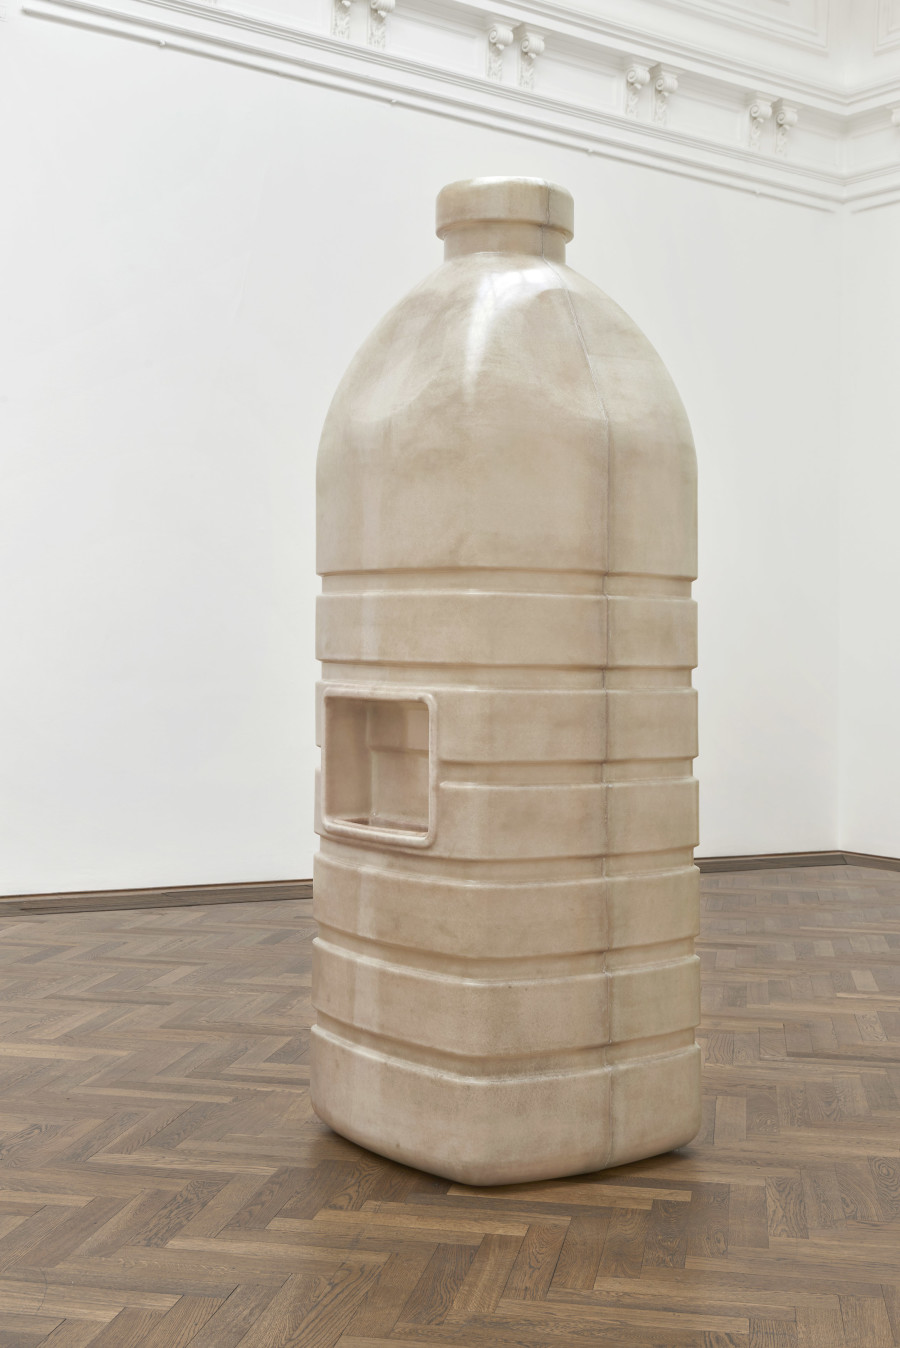 Installation view, Alia Farid, In Lieu of What Is, view on Water Bottle, 2022, Kunsthalle Basel, 2022. Photo: Philipp Hänger / Kunsthalle Basel